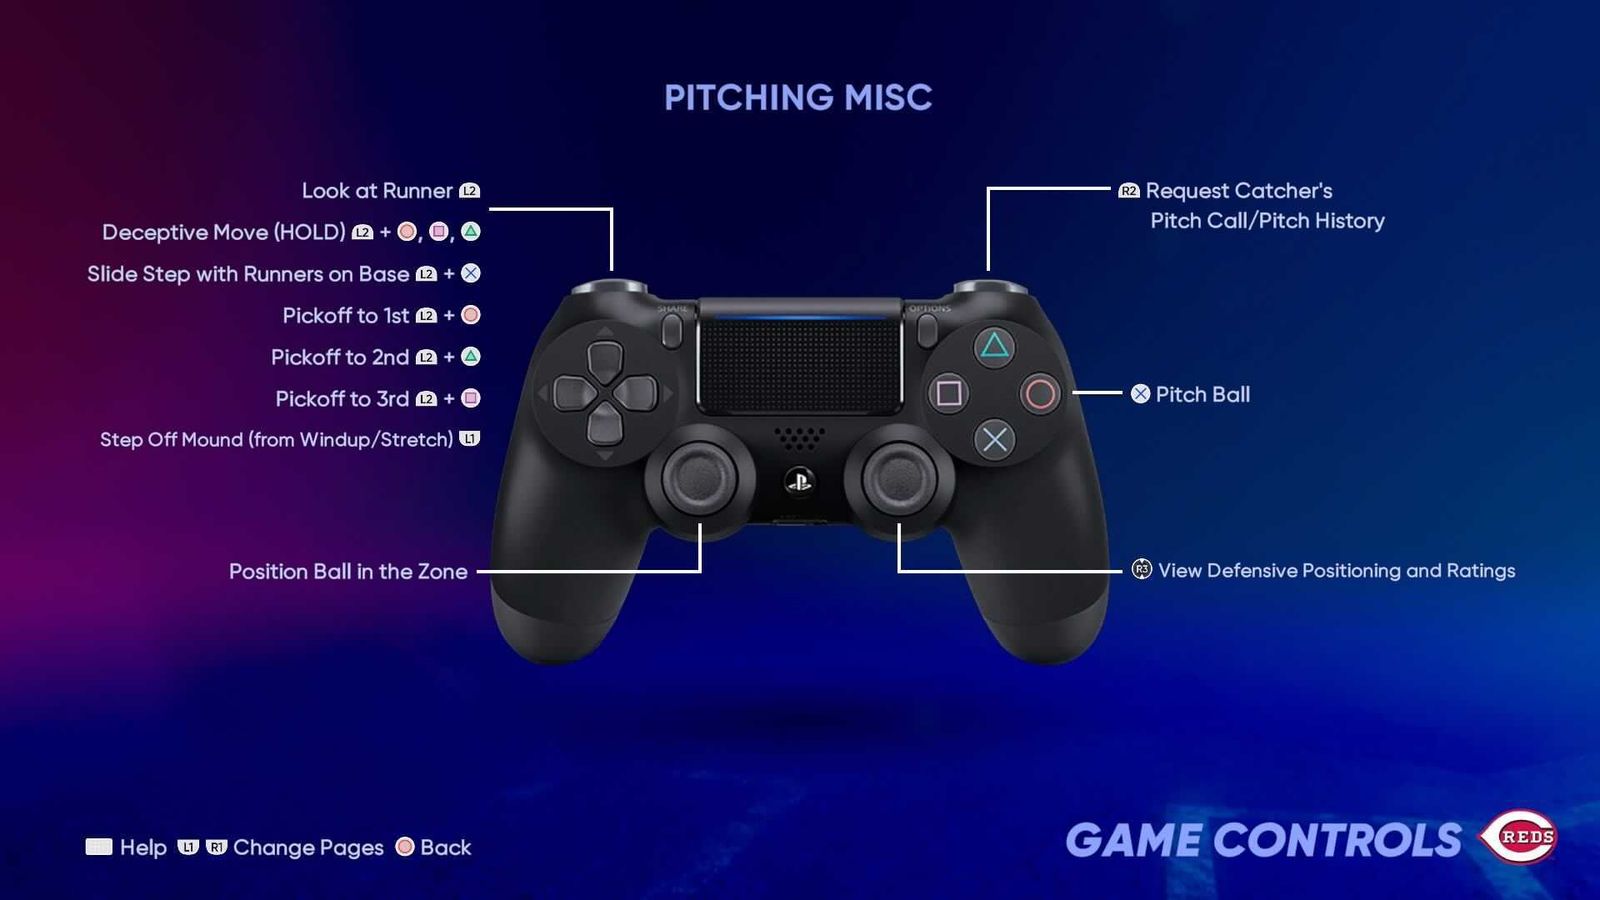 MLB The Show 22 pitching